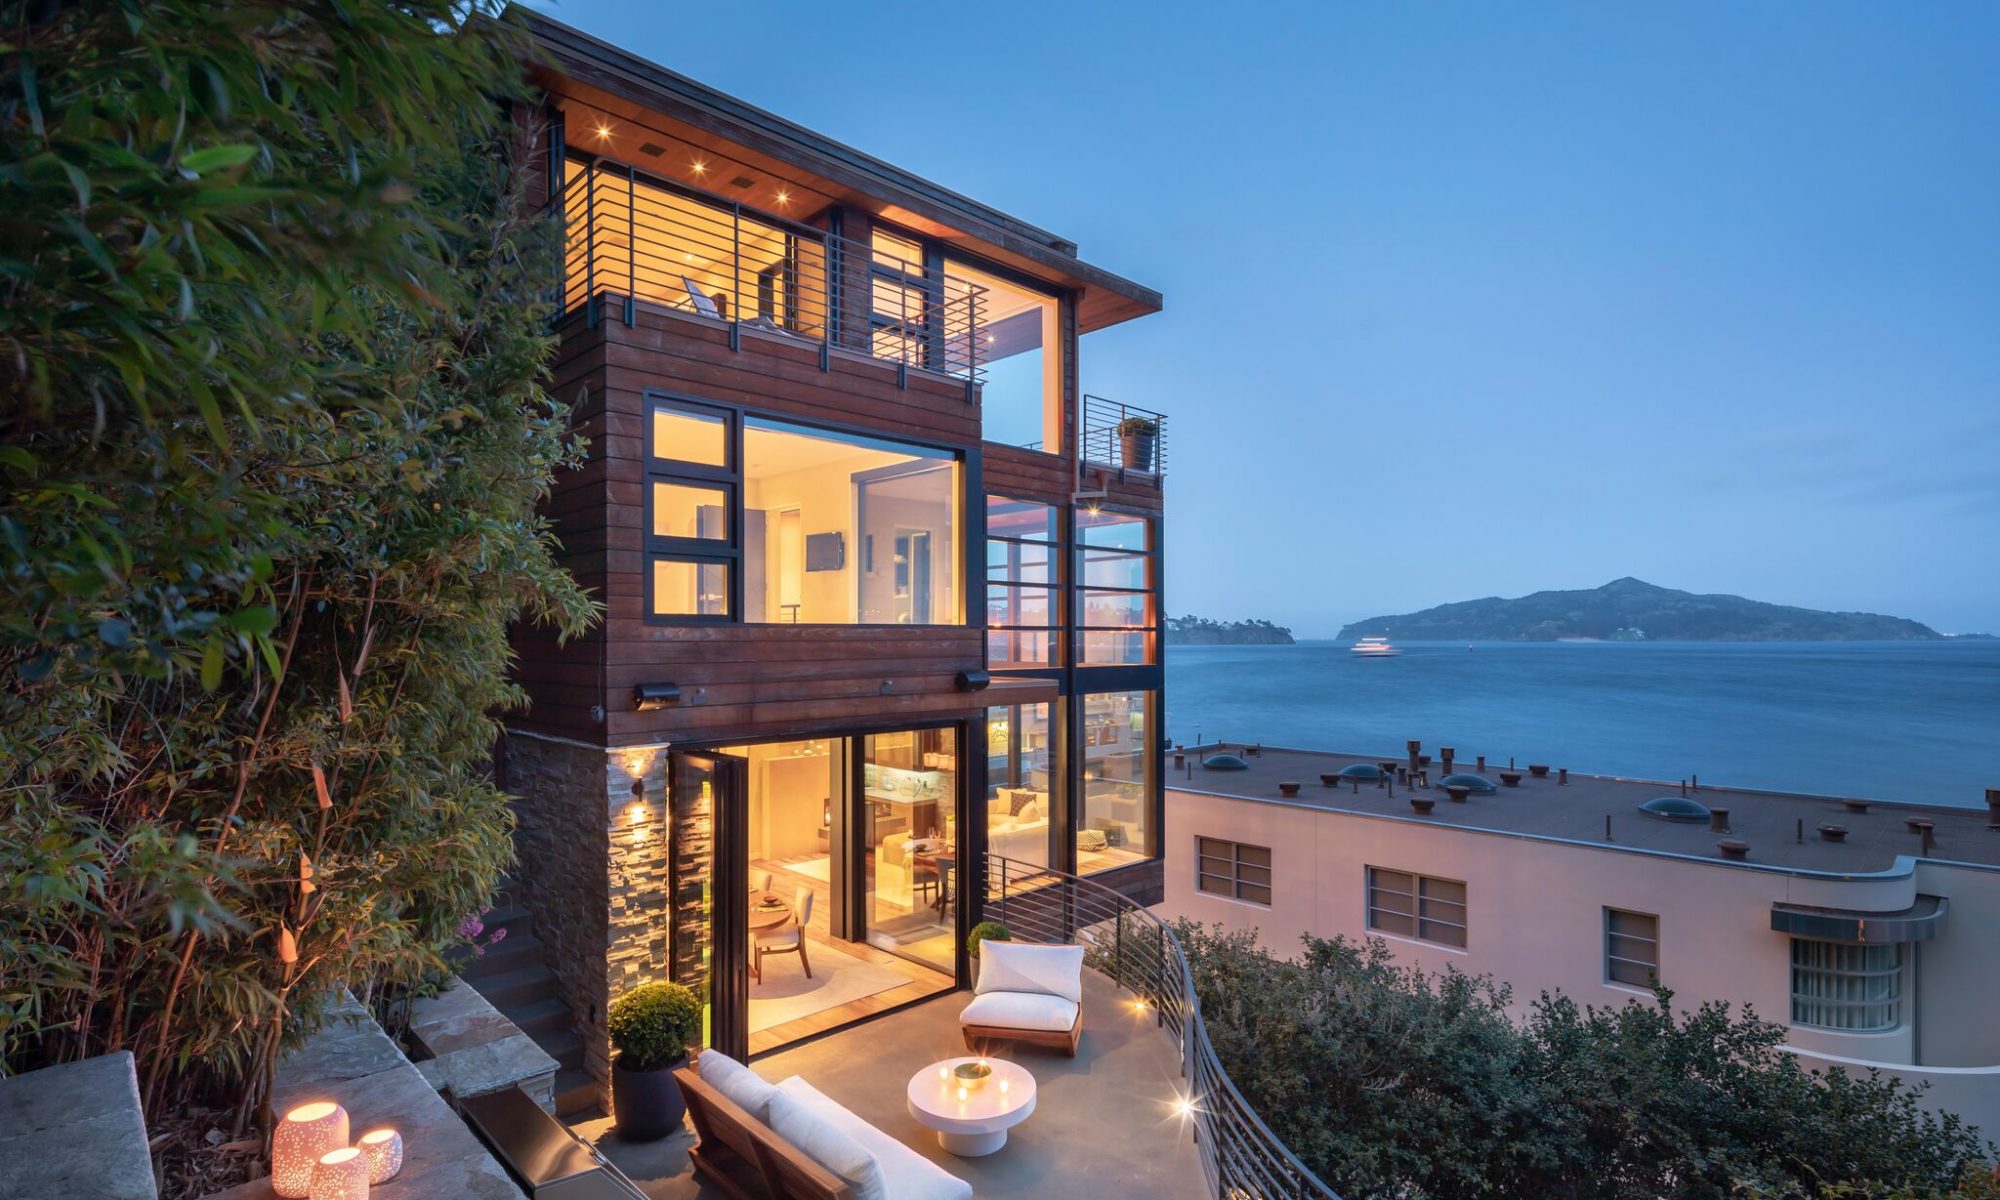 Sausalito architectural gem wrapped in sweeping Bay views